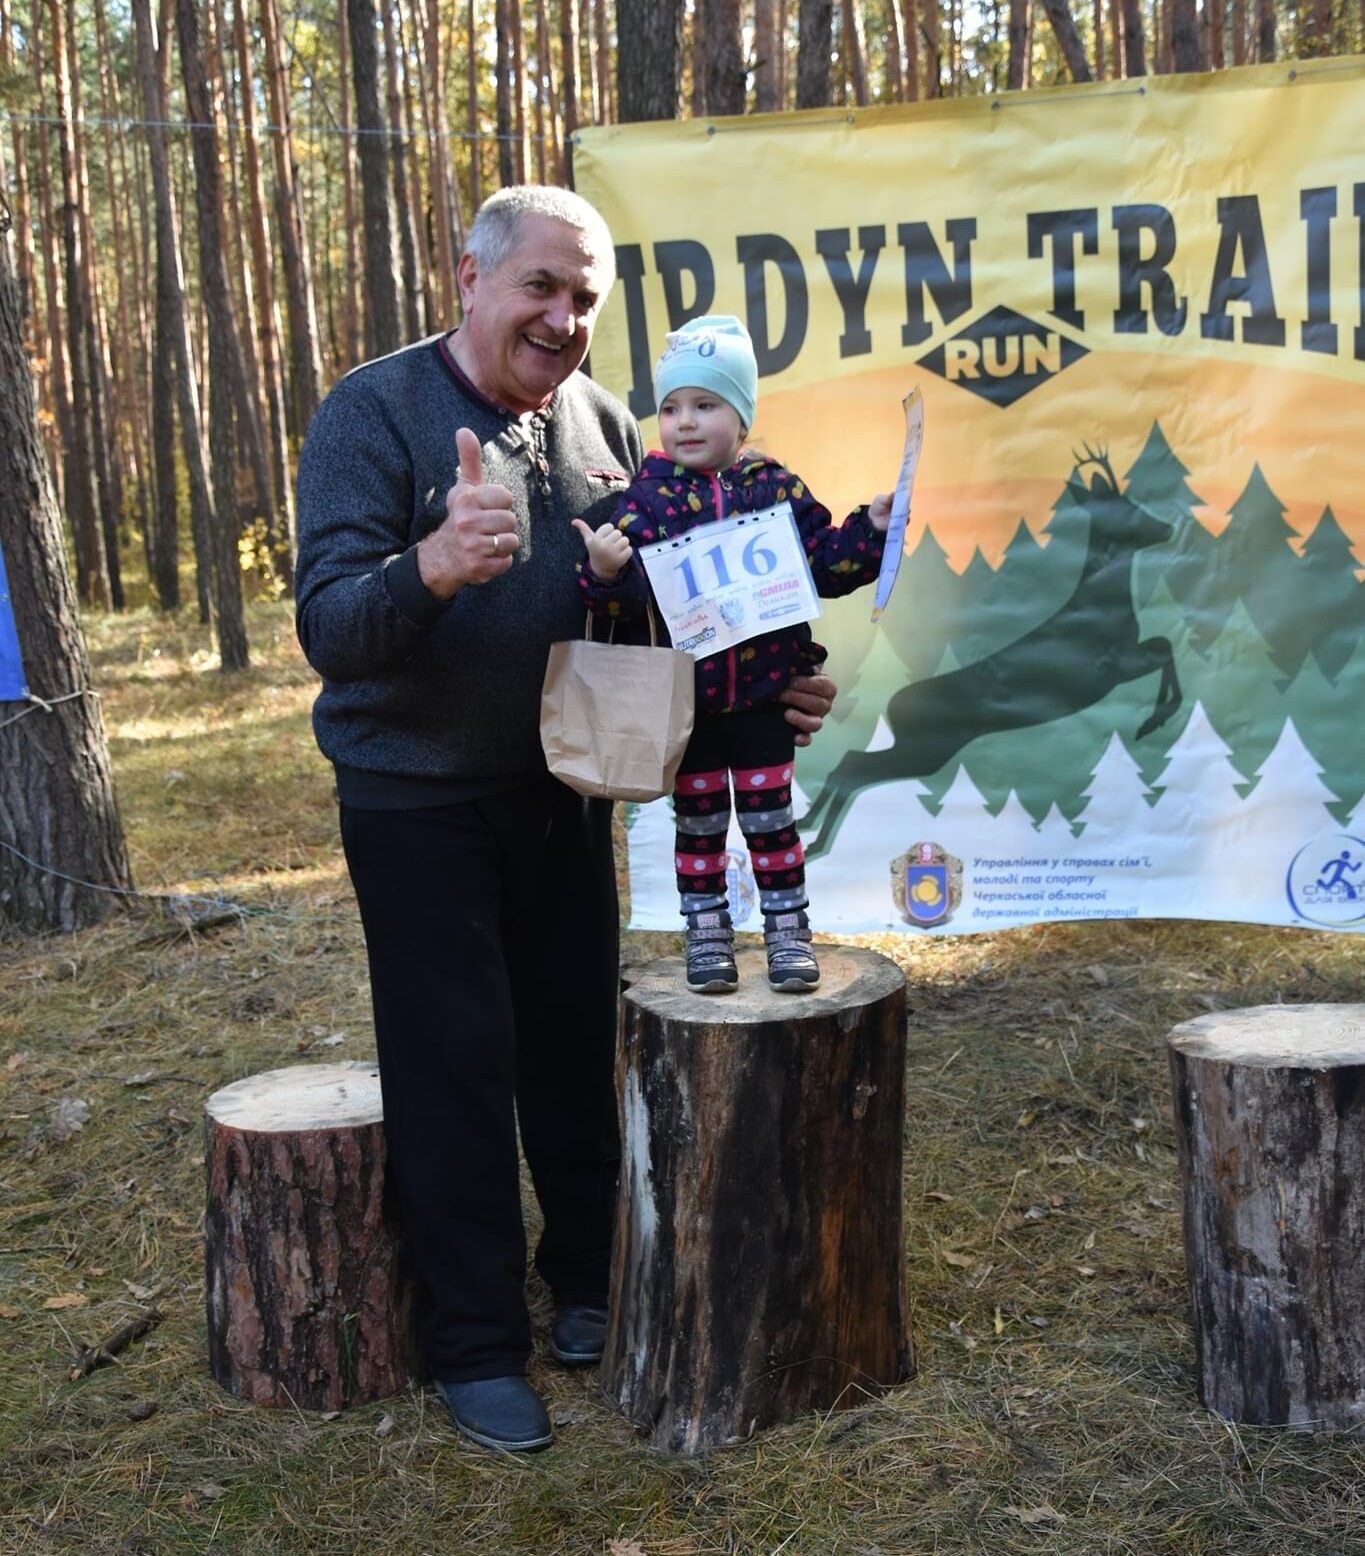 Head of the community at the All-Ukrainian Irdyn Trail Run competitions 